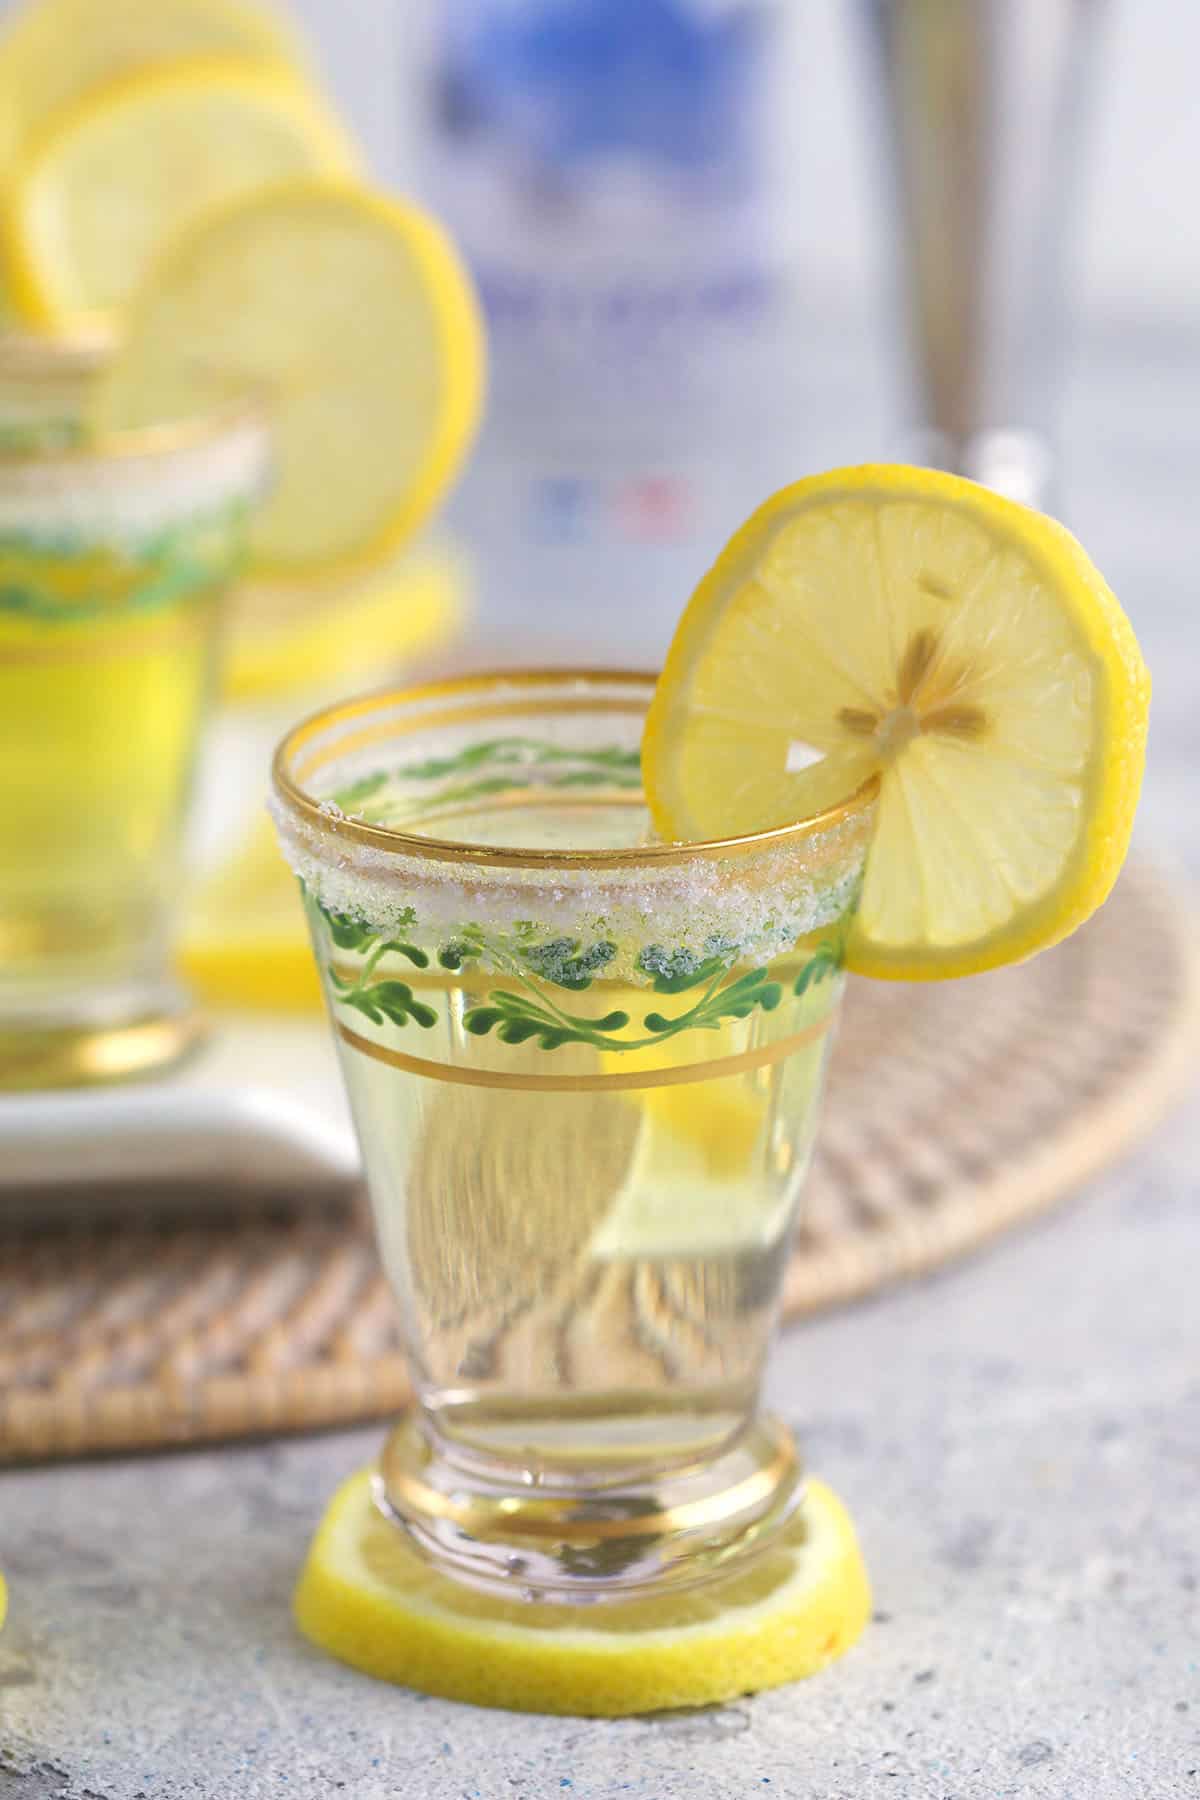 A shot glass is placed on top of a lemon slice.